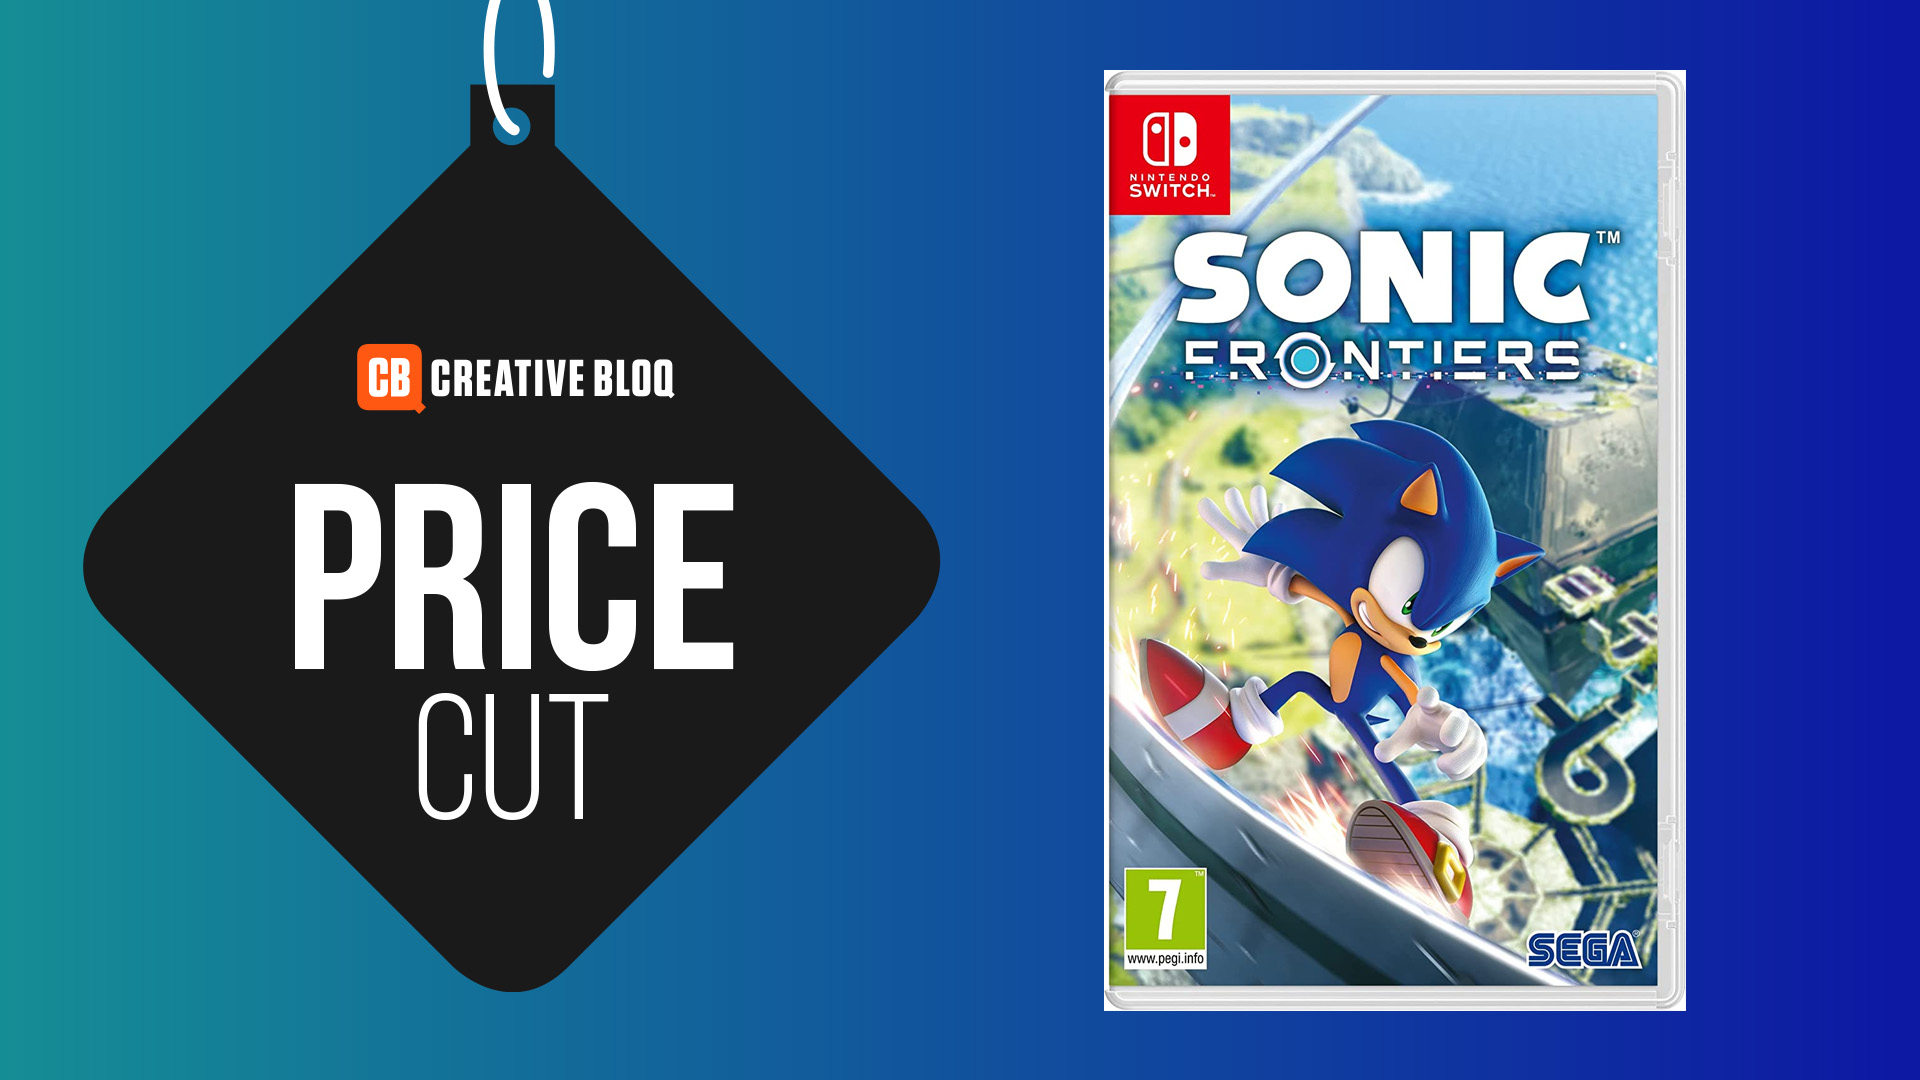 A product shot of the Sonic Frontiers game on a blue background with the words price cut